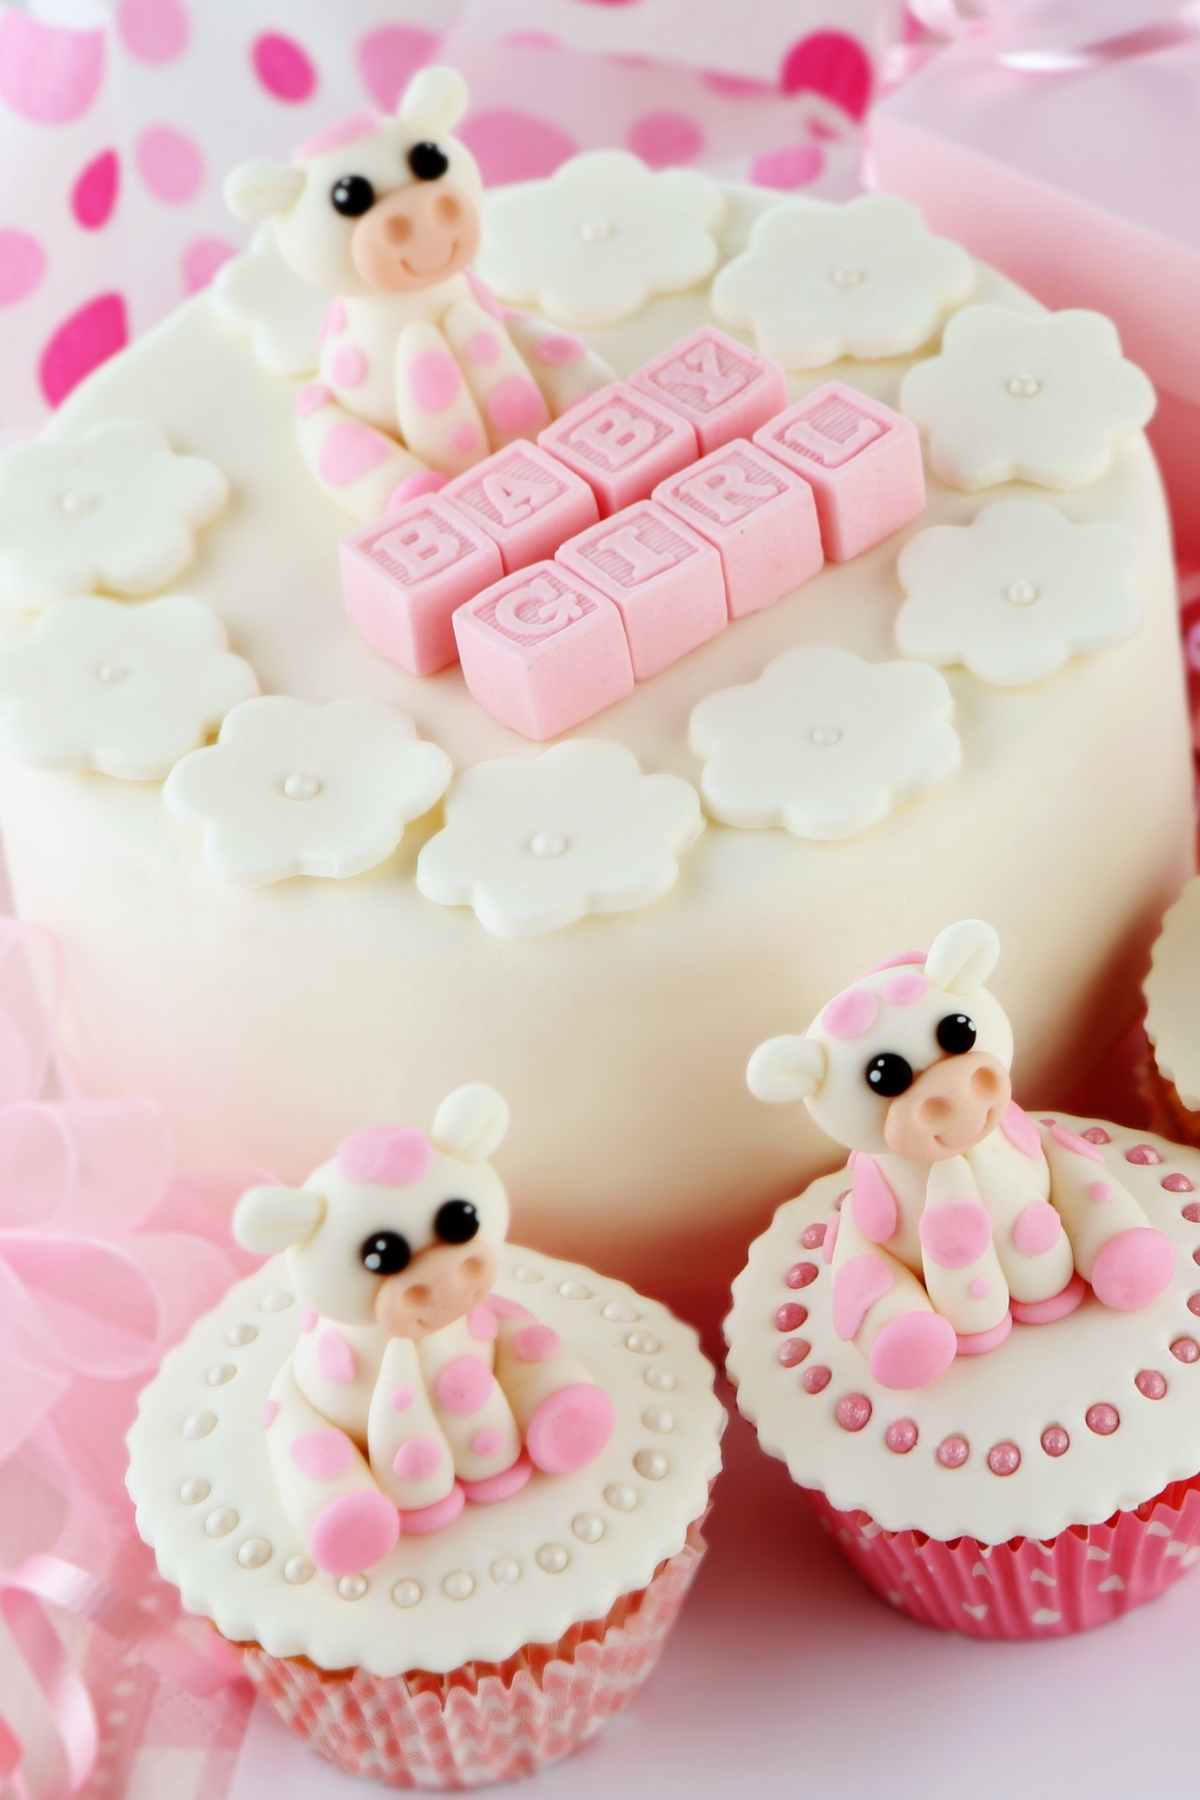 Celebrate the upcoming birth of a baby with a colorful cake or cupcakes! We’ve collected 13 of the best baby shower cakes that will make your baby shower unforgettable.